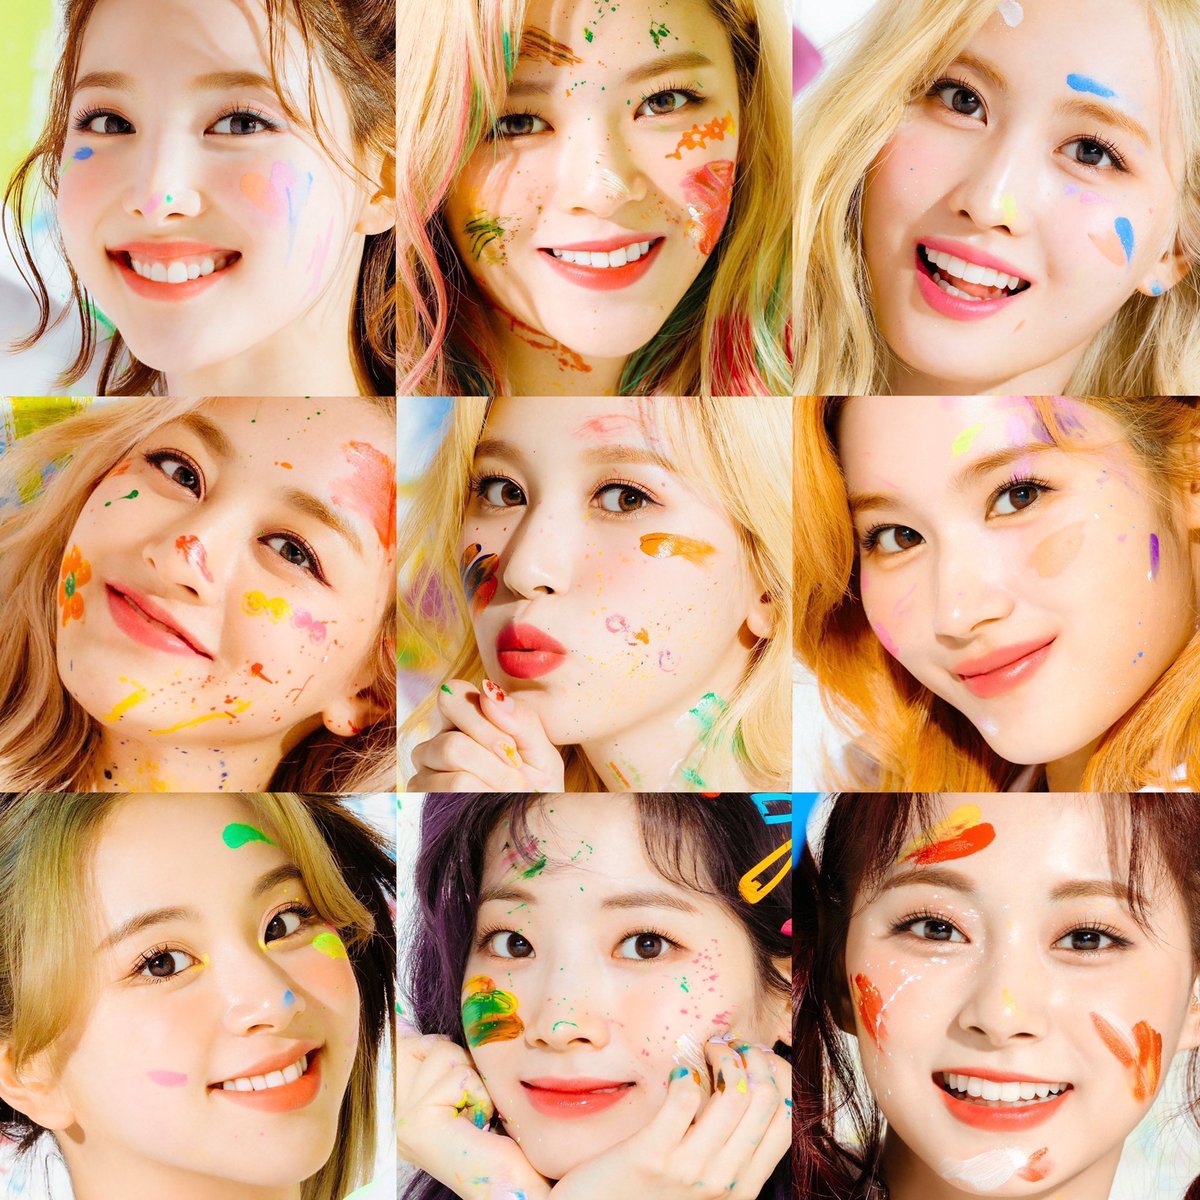 [D-55]Fanfare Jihyo is so bright and colorful, she puts smiles on peoples faces, including me  #15YearsWithJihyo #100JihyoMoments @JYPETWICE 